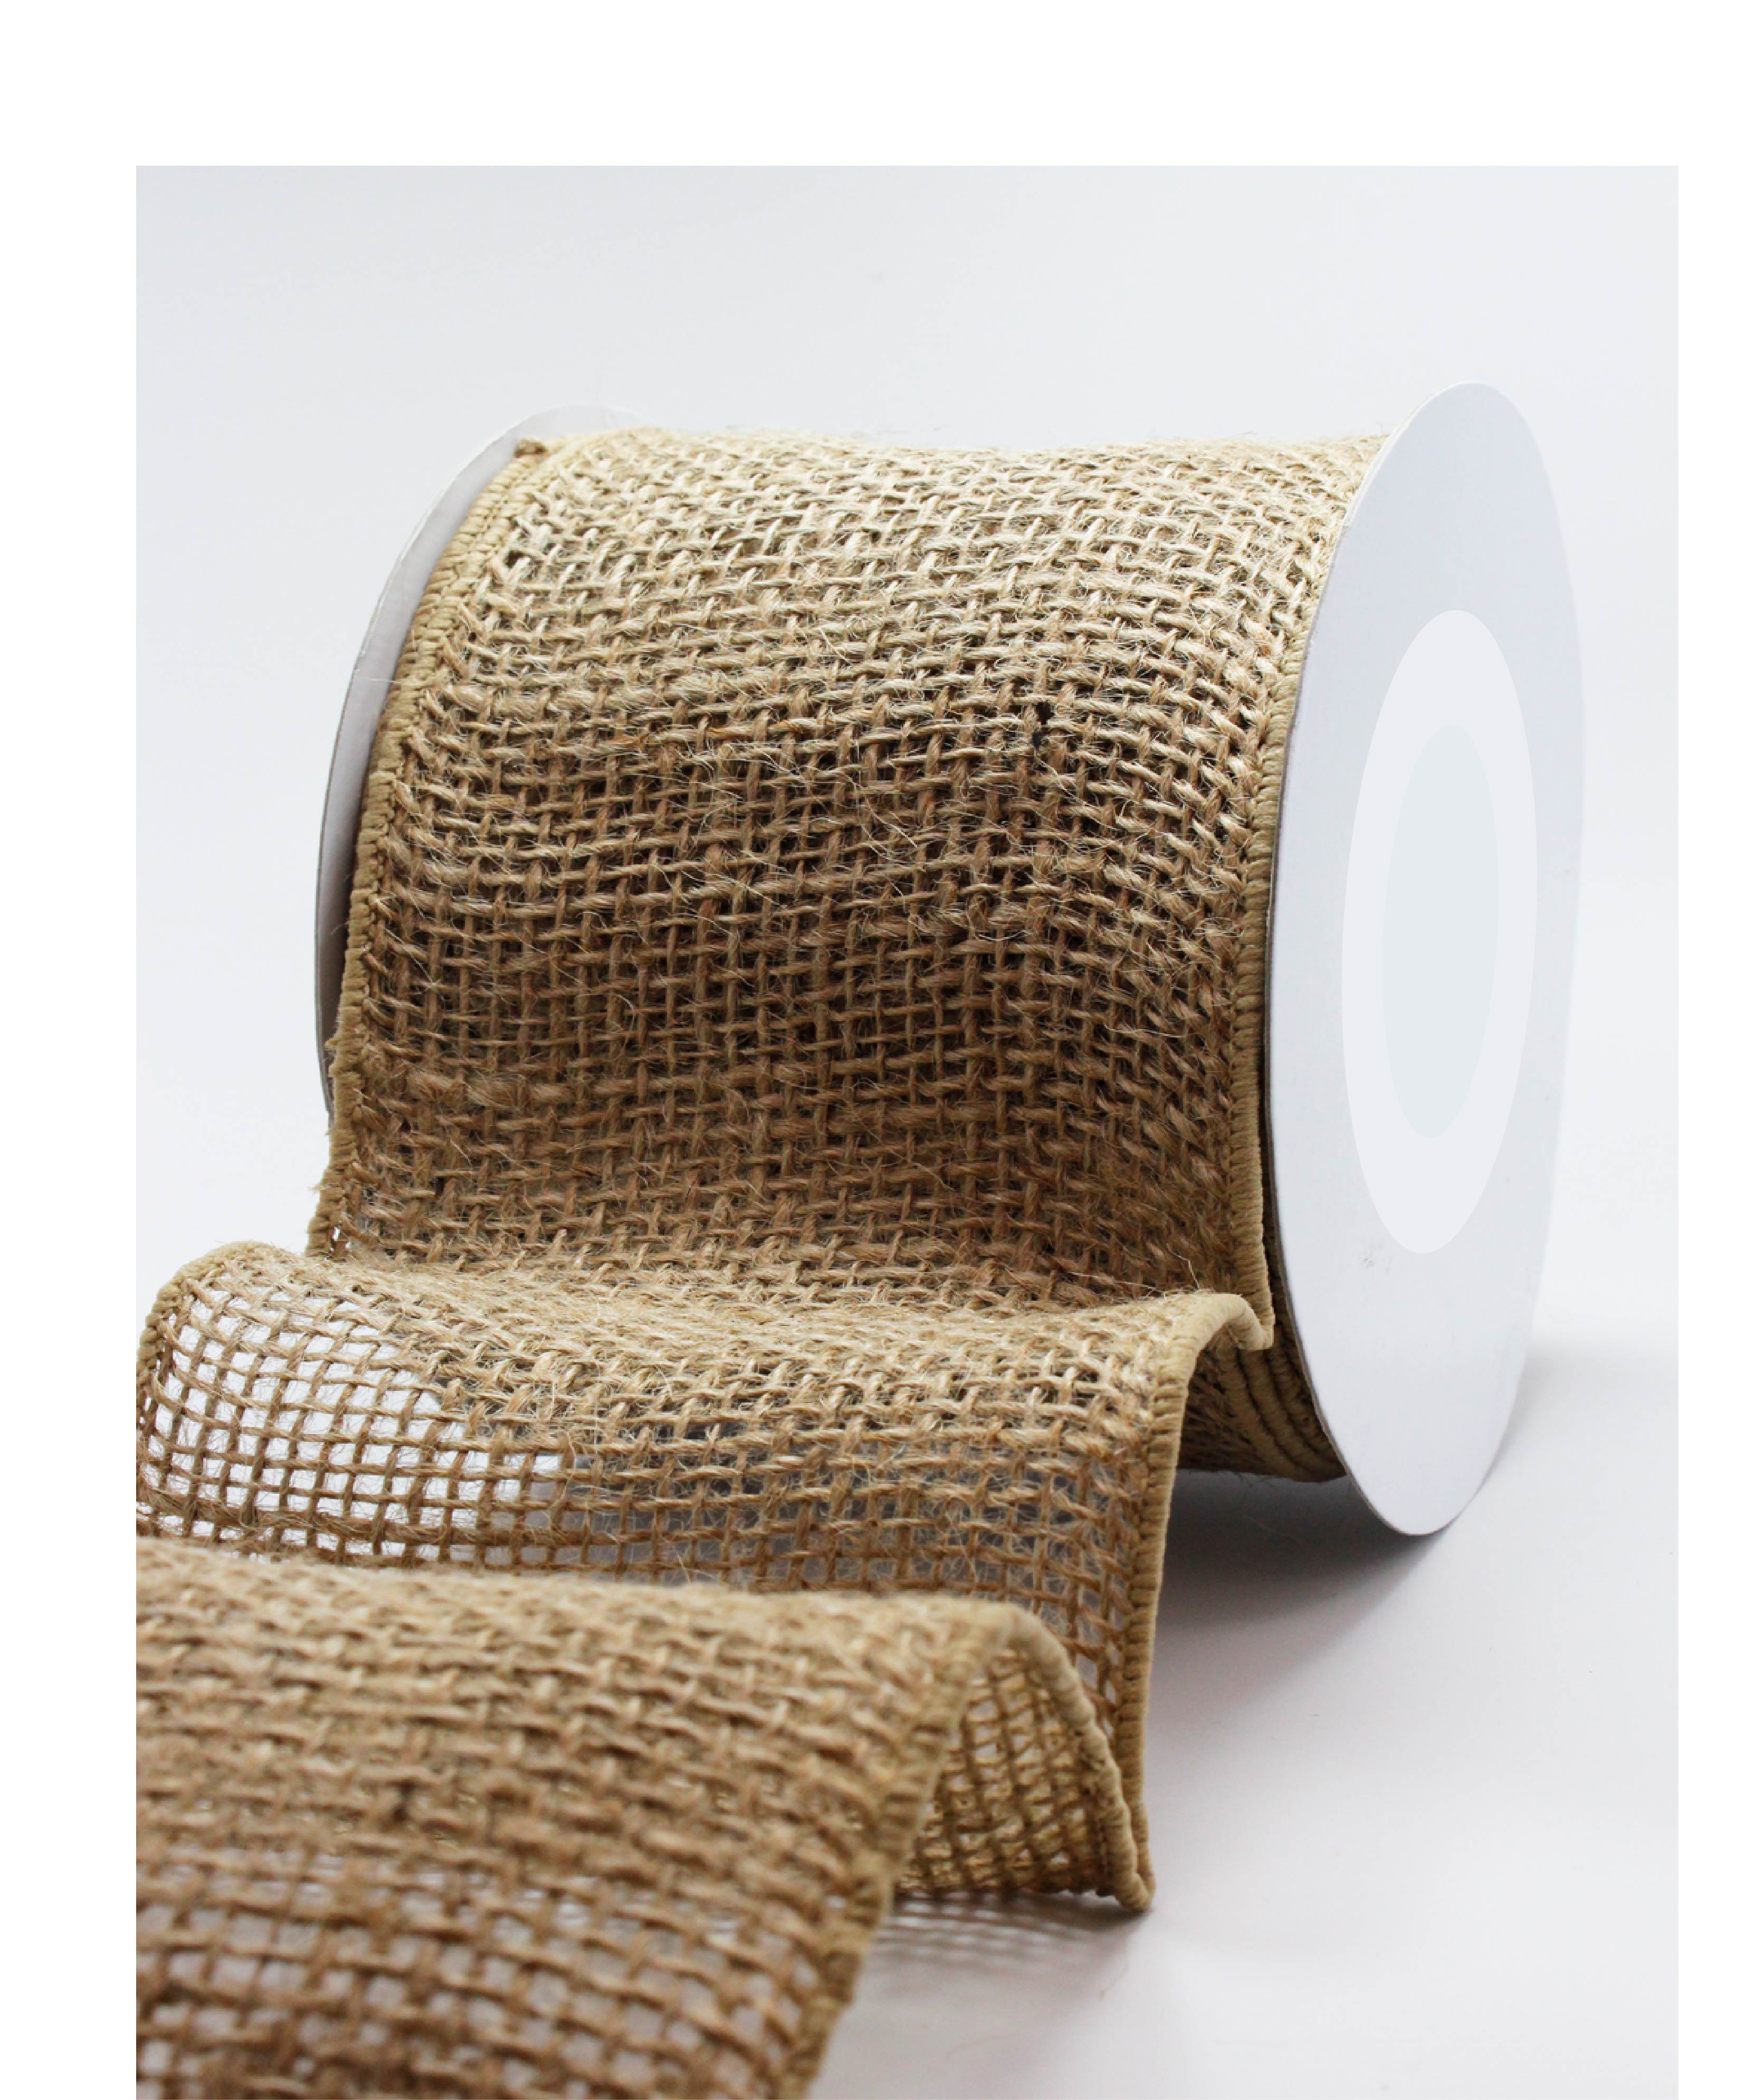 4 Inch,  Classic 100% Jute Burlap Ribbon with Wired Edge, 10 yards